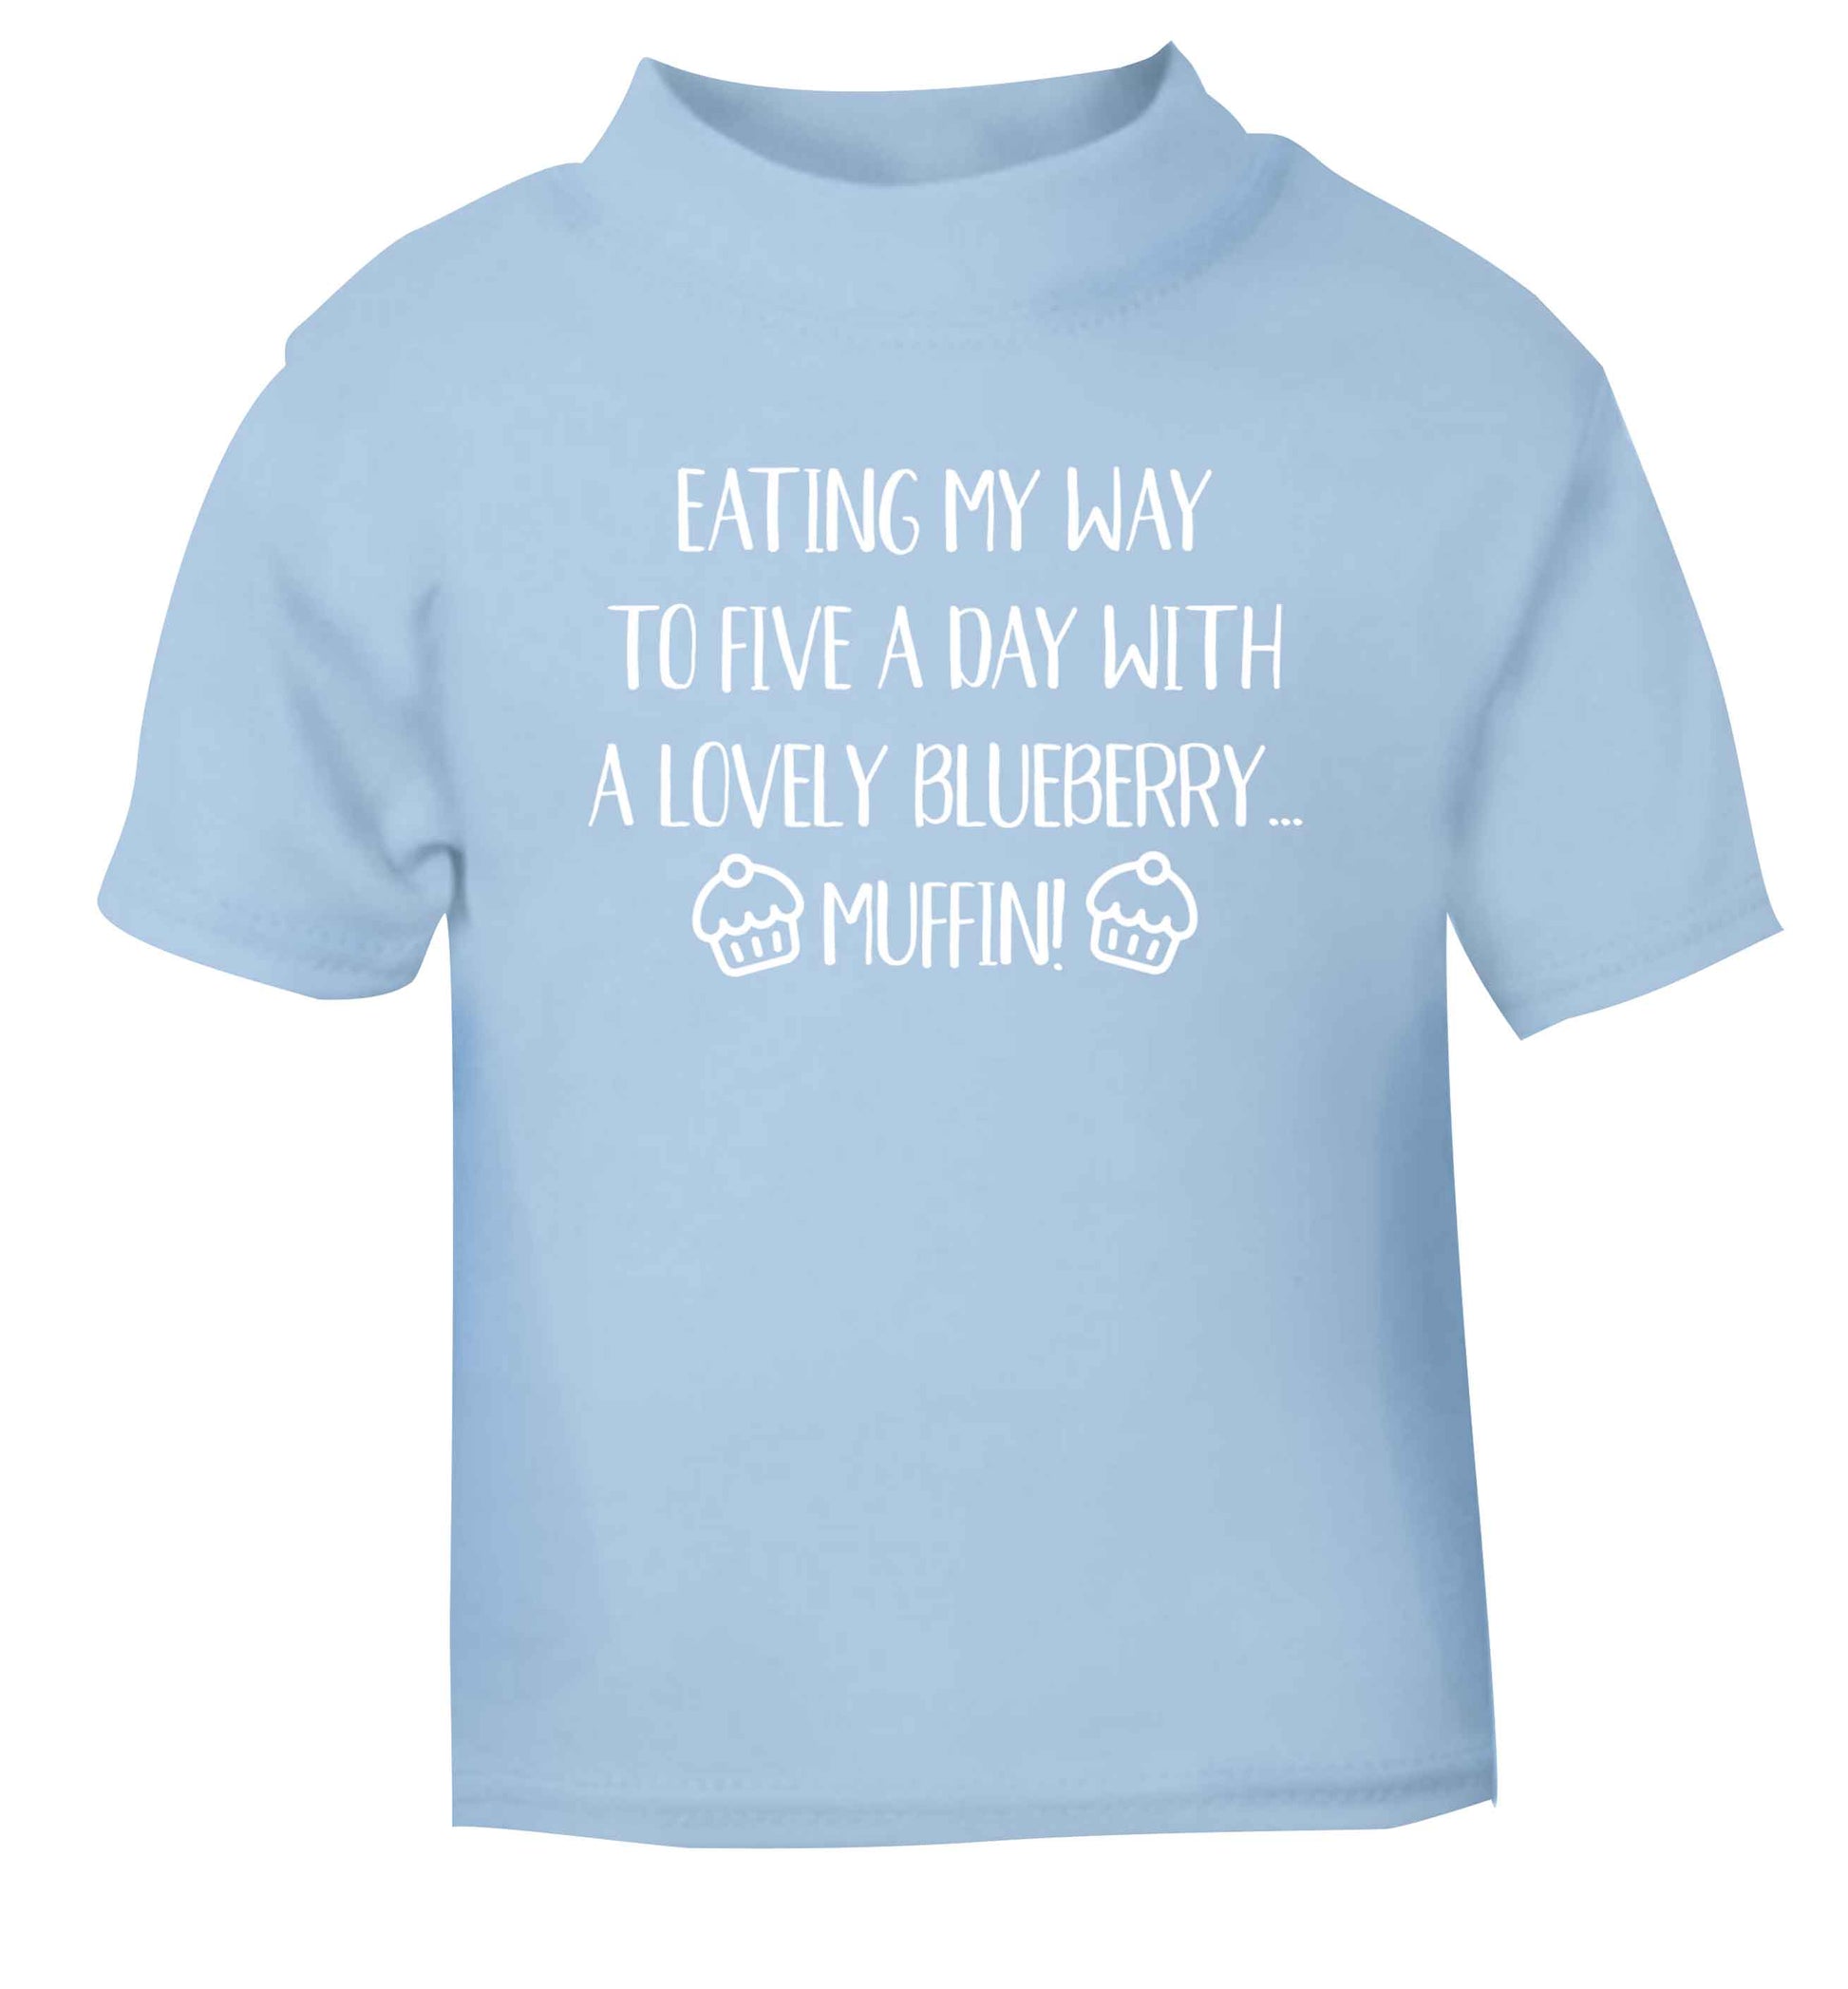 Eating my way to five a day with a lovely blueberry muffin light blue Baby Toddler Tshirt 2 Years